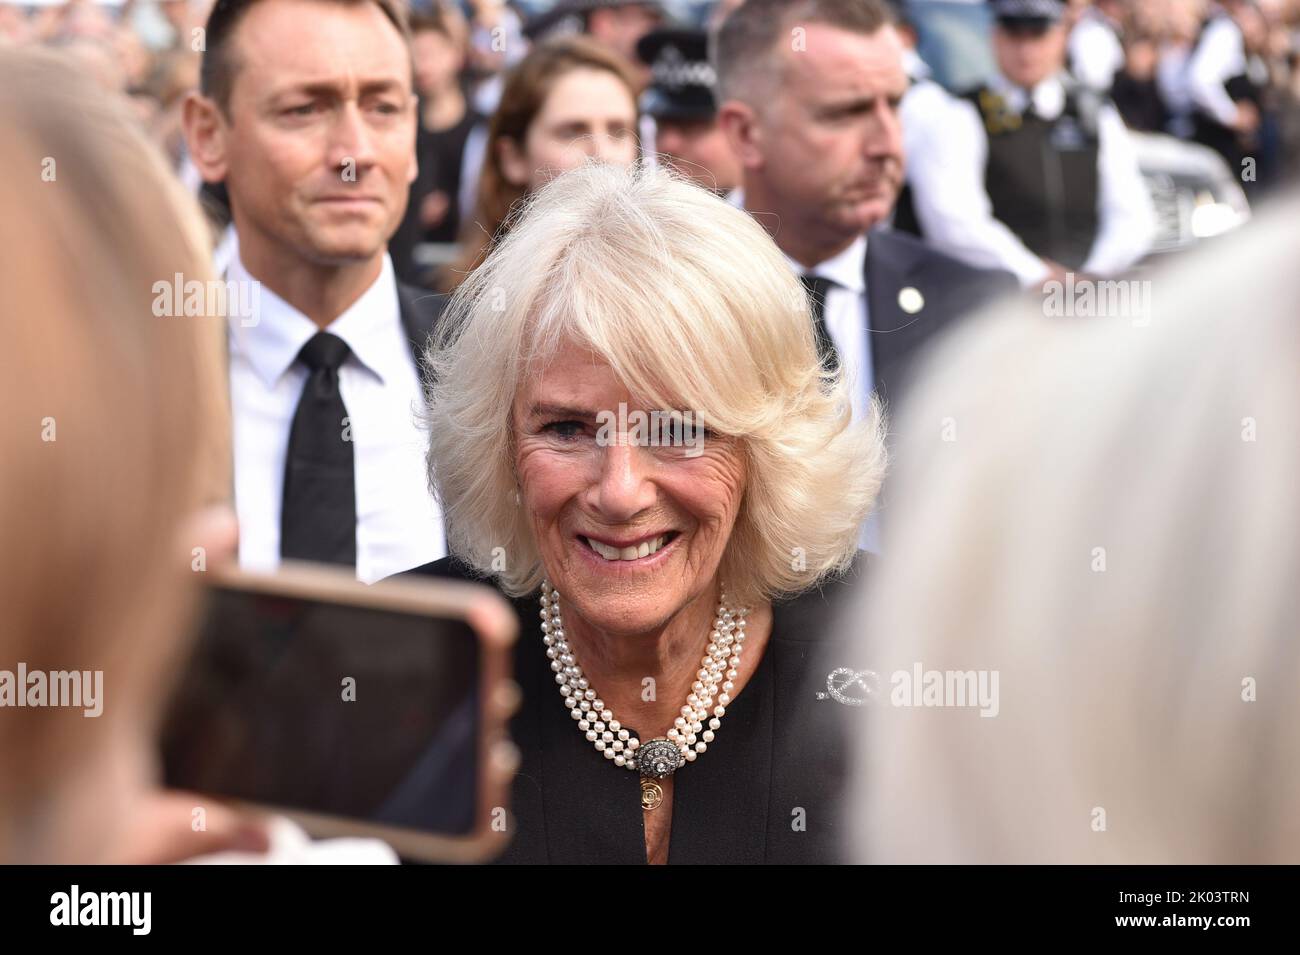 London, England, UK. 9th Sep, 2022. Queen Consort shaking hands with members of the public who had gathered outside Buckingham Palace. Huge crowds cheered as King Charles III arrived for the first time as monarch, in a state Rolls-Royce alongside CAMILLA, the Queen Consort. (Credit Image: © Thomas Krych/ZUMA Press Wire) Stock Photo